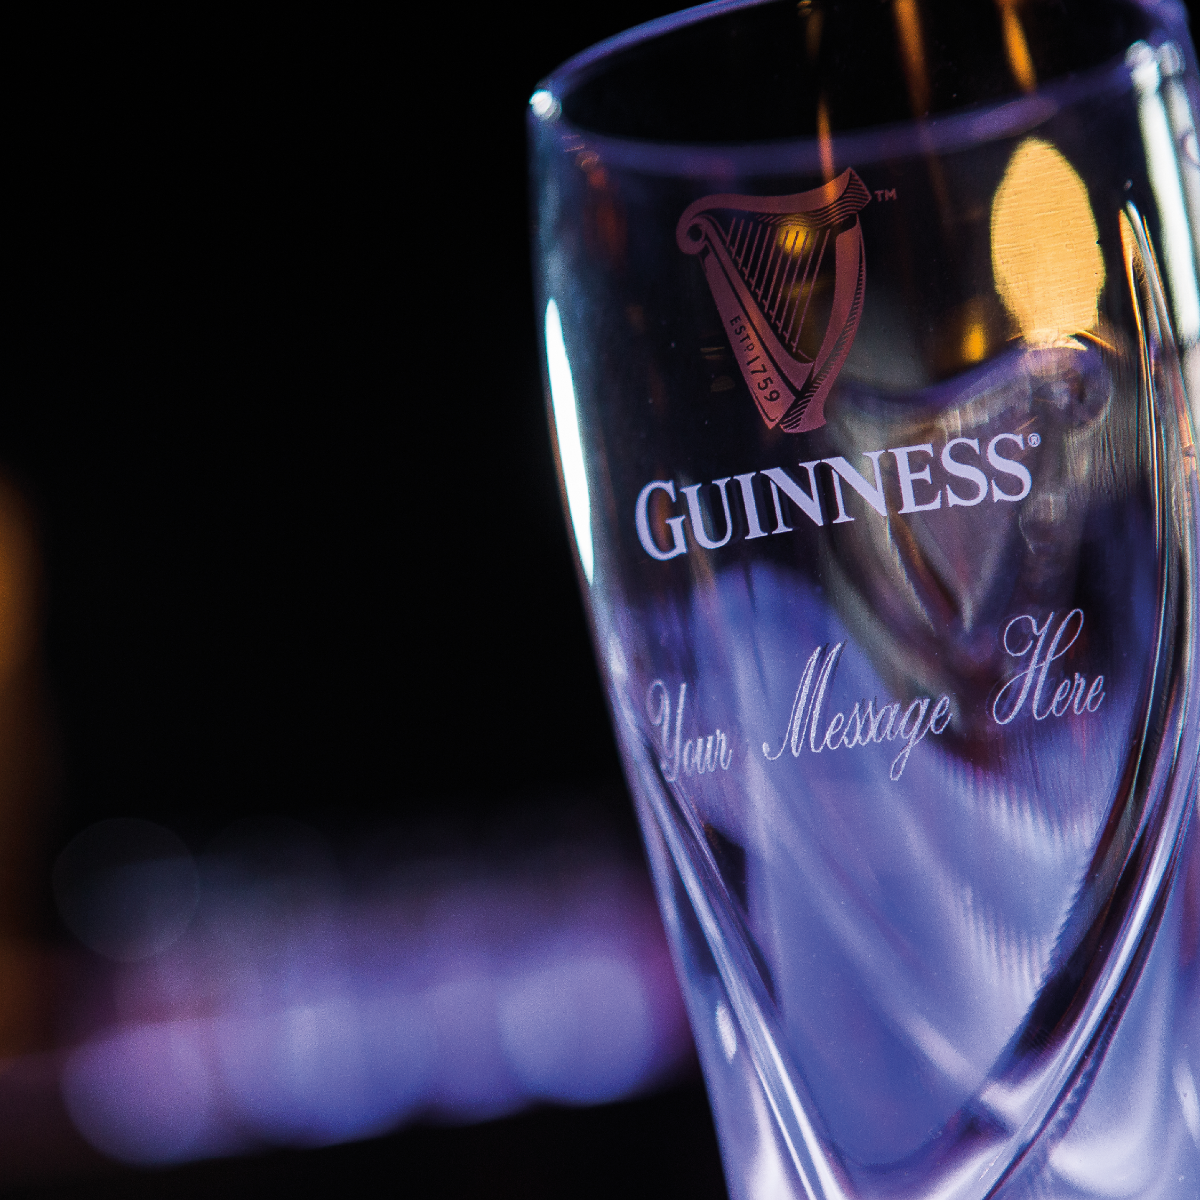 Guinness Personalised Glass in a Gift Box – Guinness Storehouse